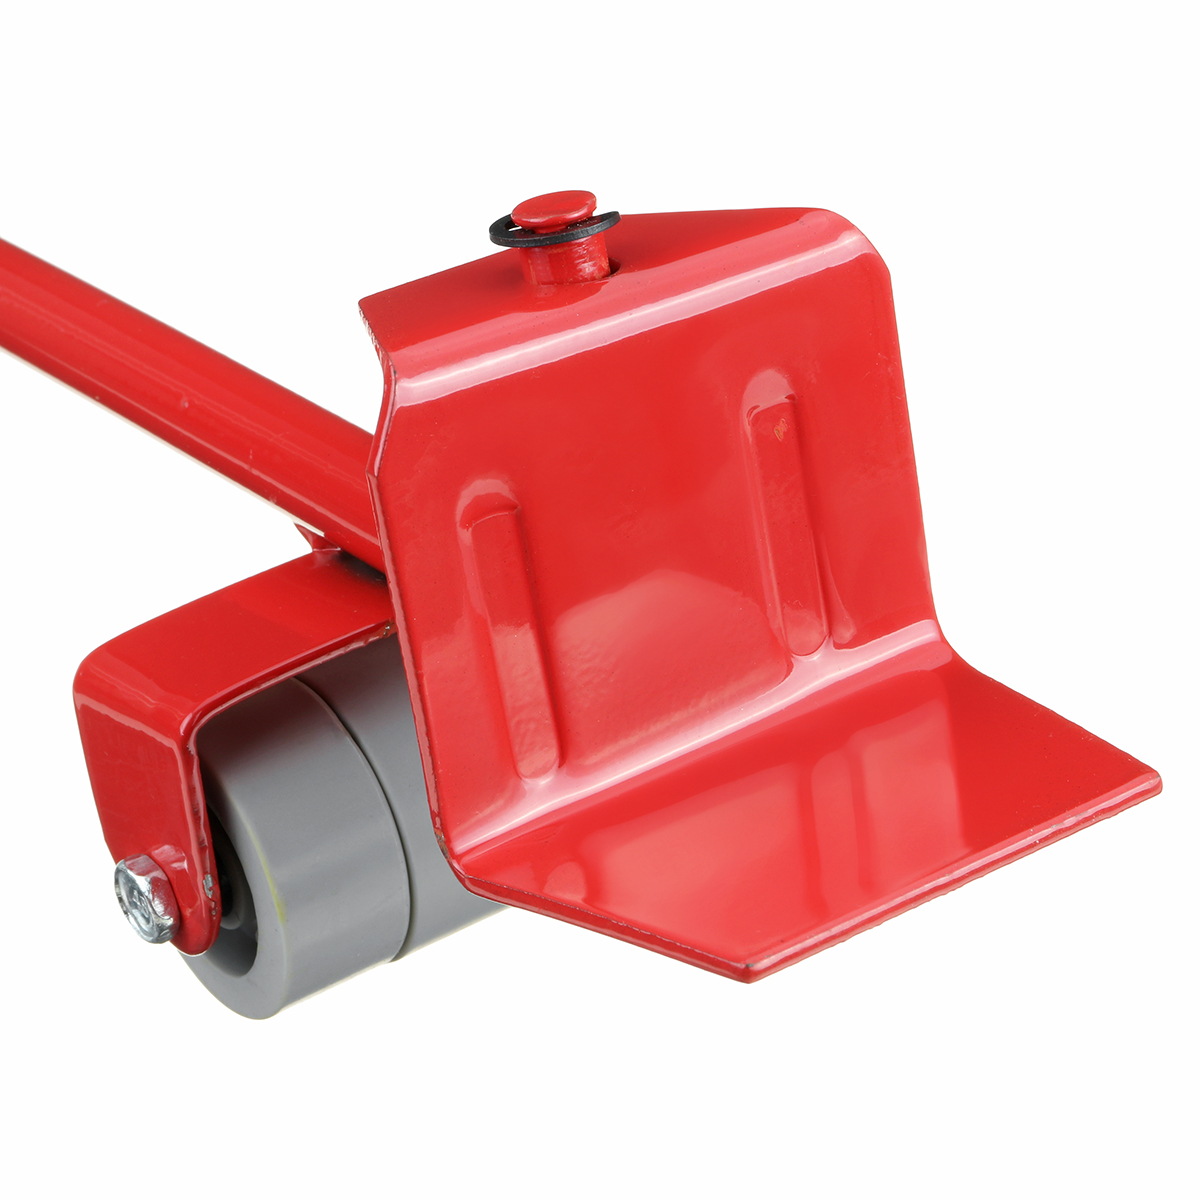 5Pcs-Red-Furniture-Mover-Heavy-Duty-Lifter-Mover-Transport-Set-Furniture-Roller-Tool-1635325-10